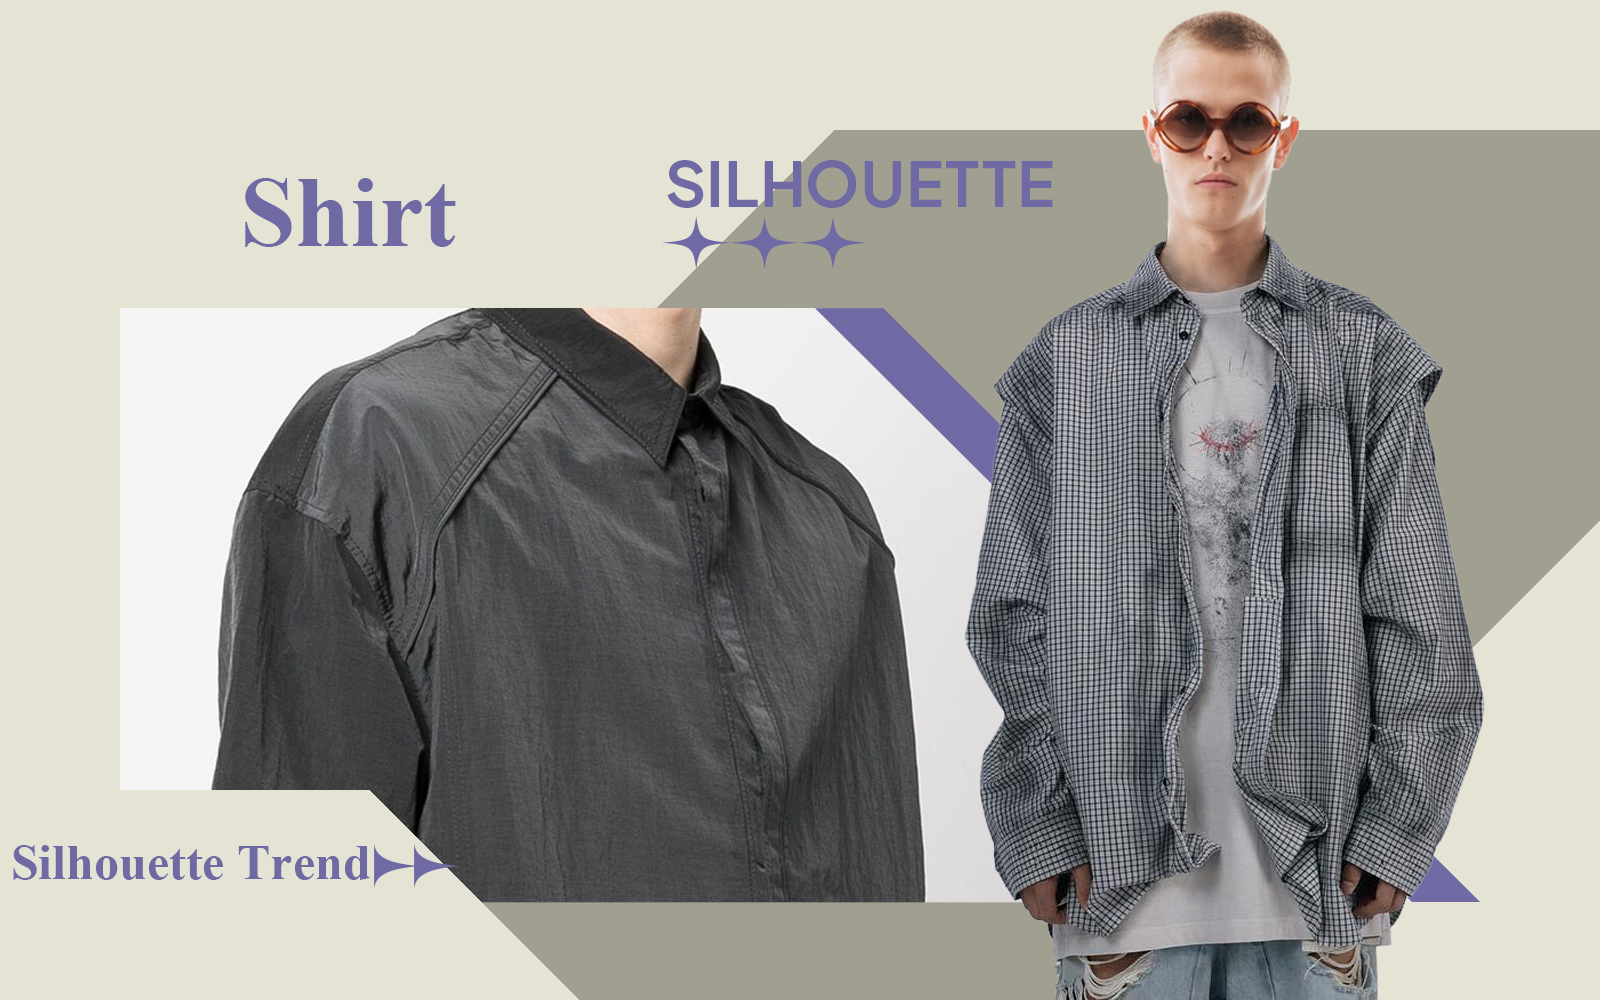 Street Fashion -- The Silhouette Trend for Men's Shirt